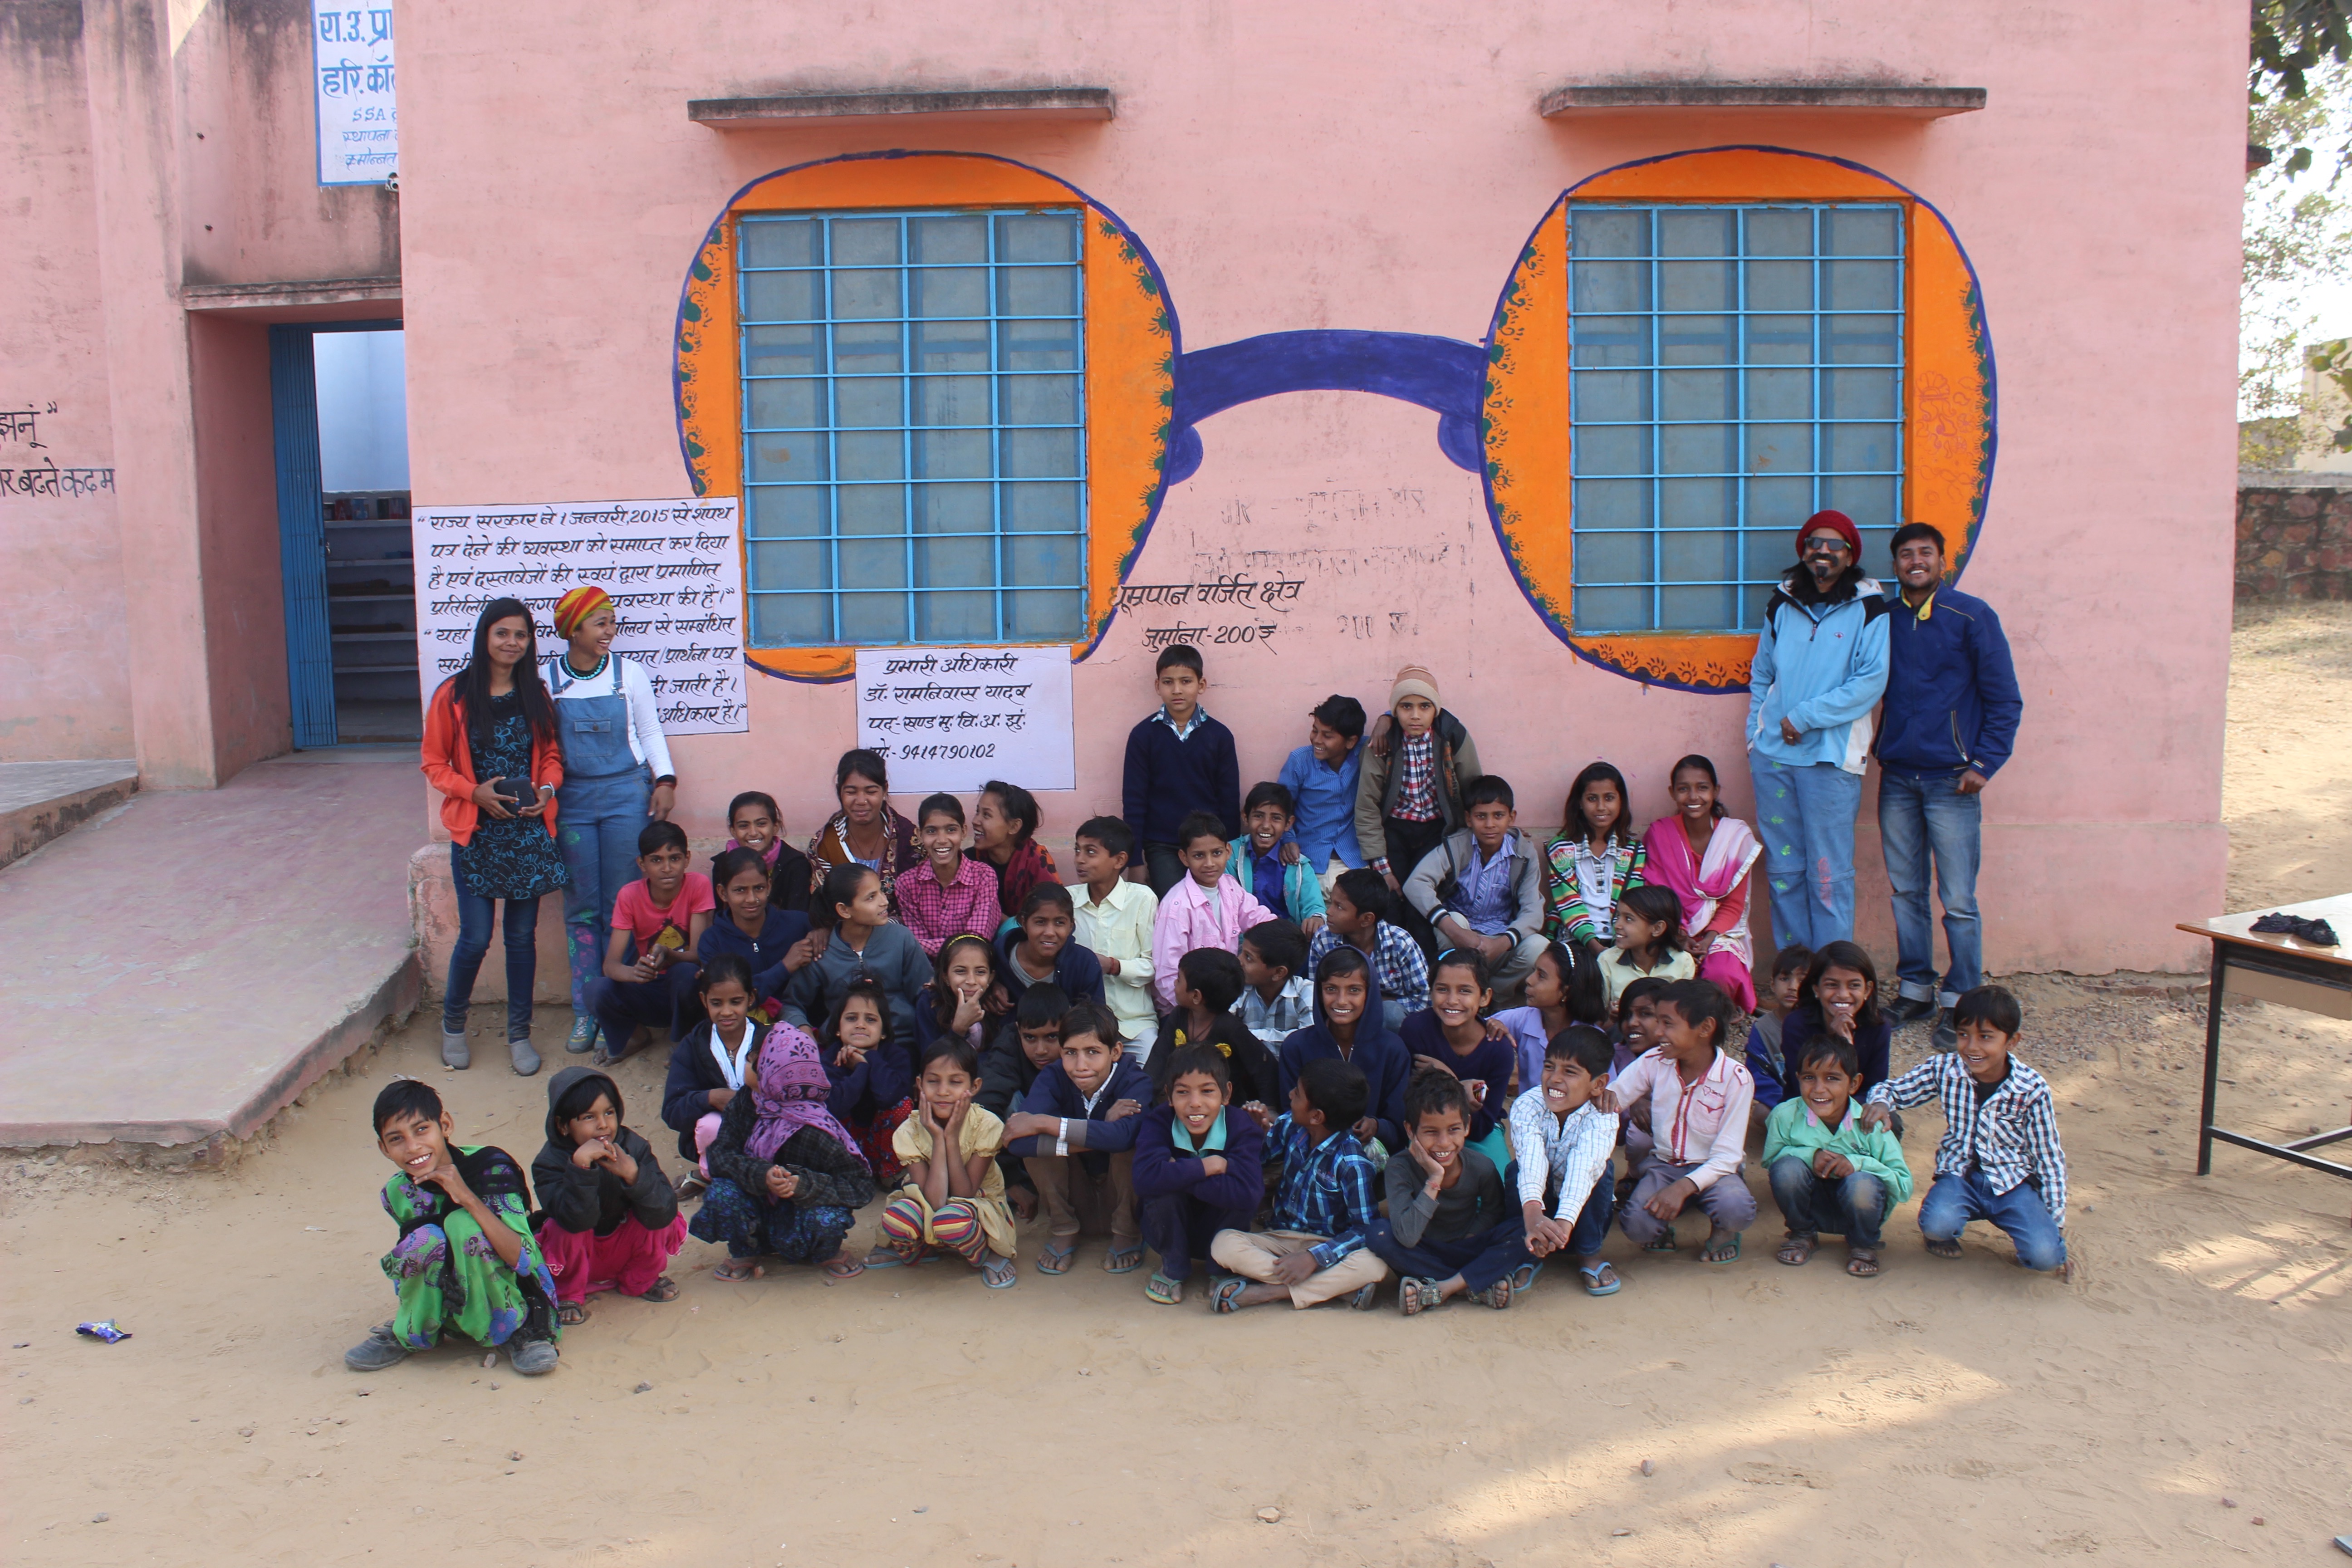 A mural on the wall painted with kids in a village school